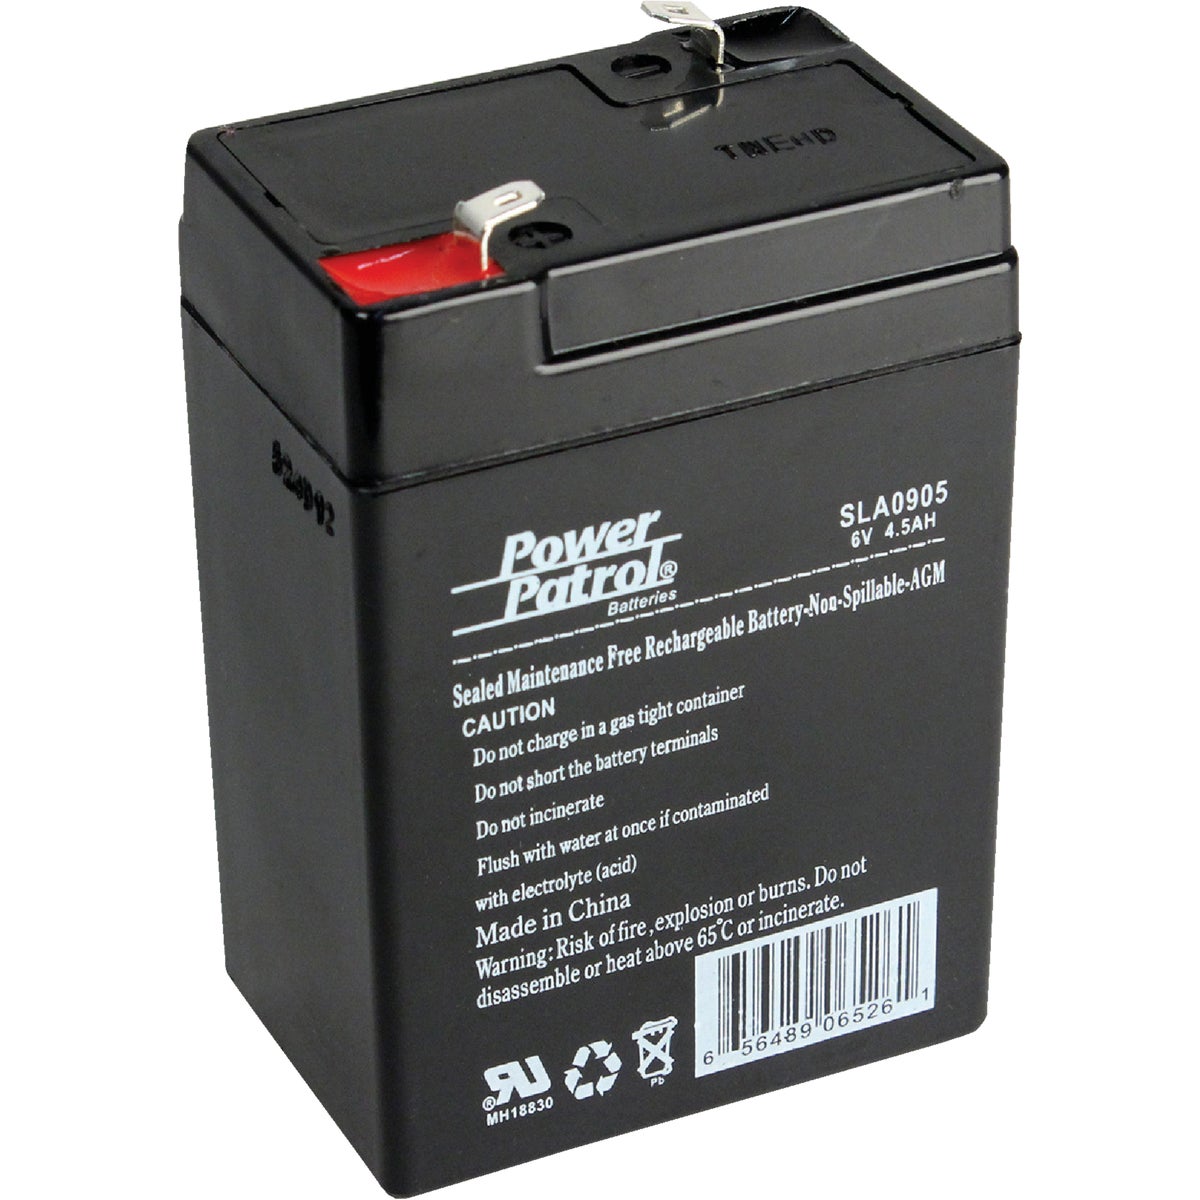 Item 800496, Sealed lead acid rechargeable battery.